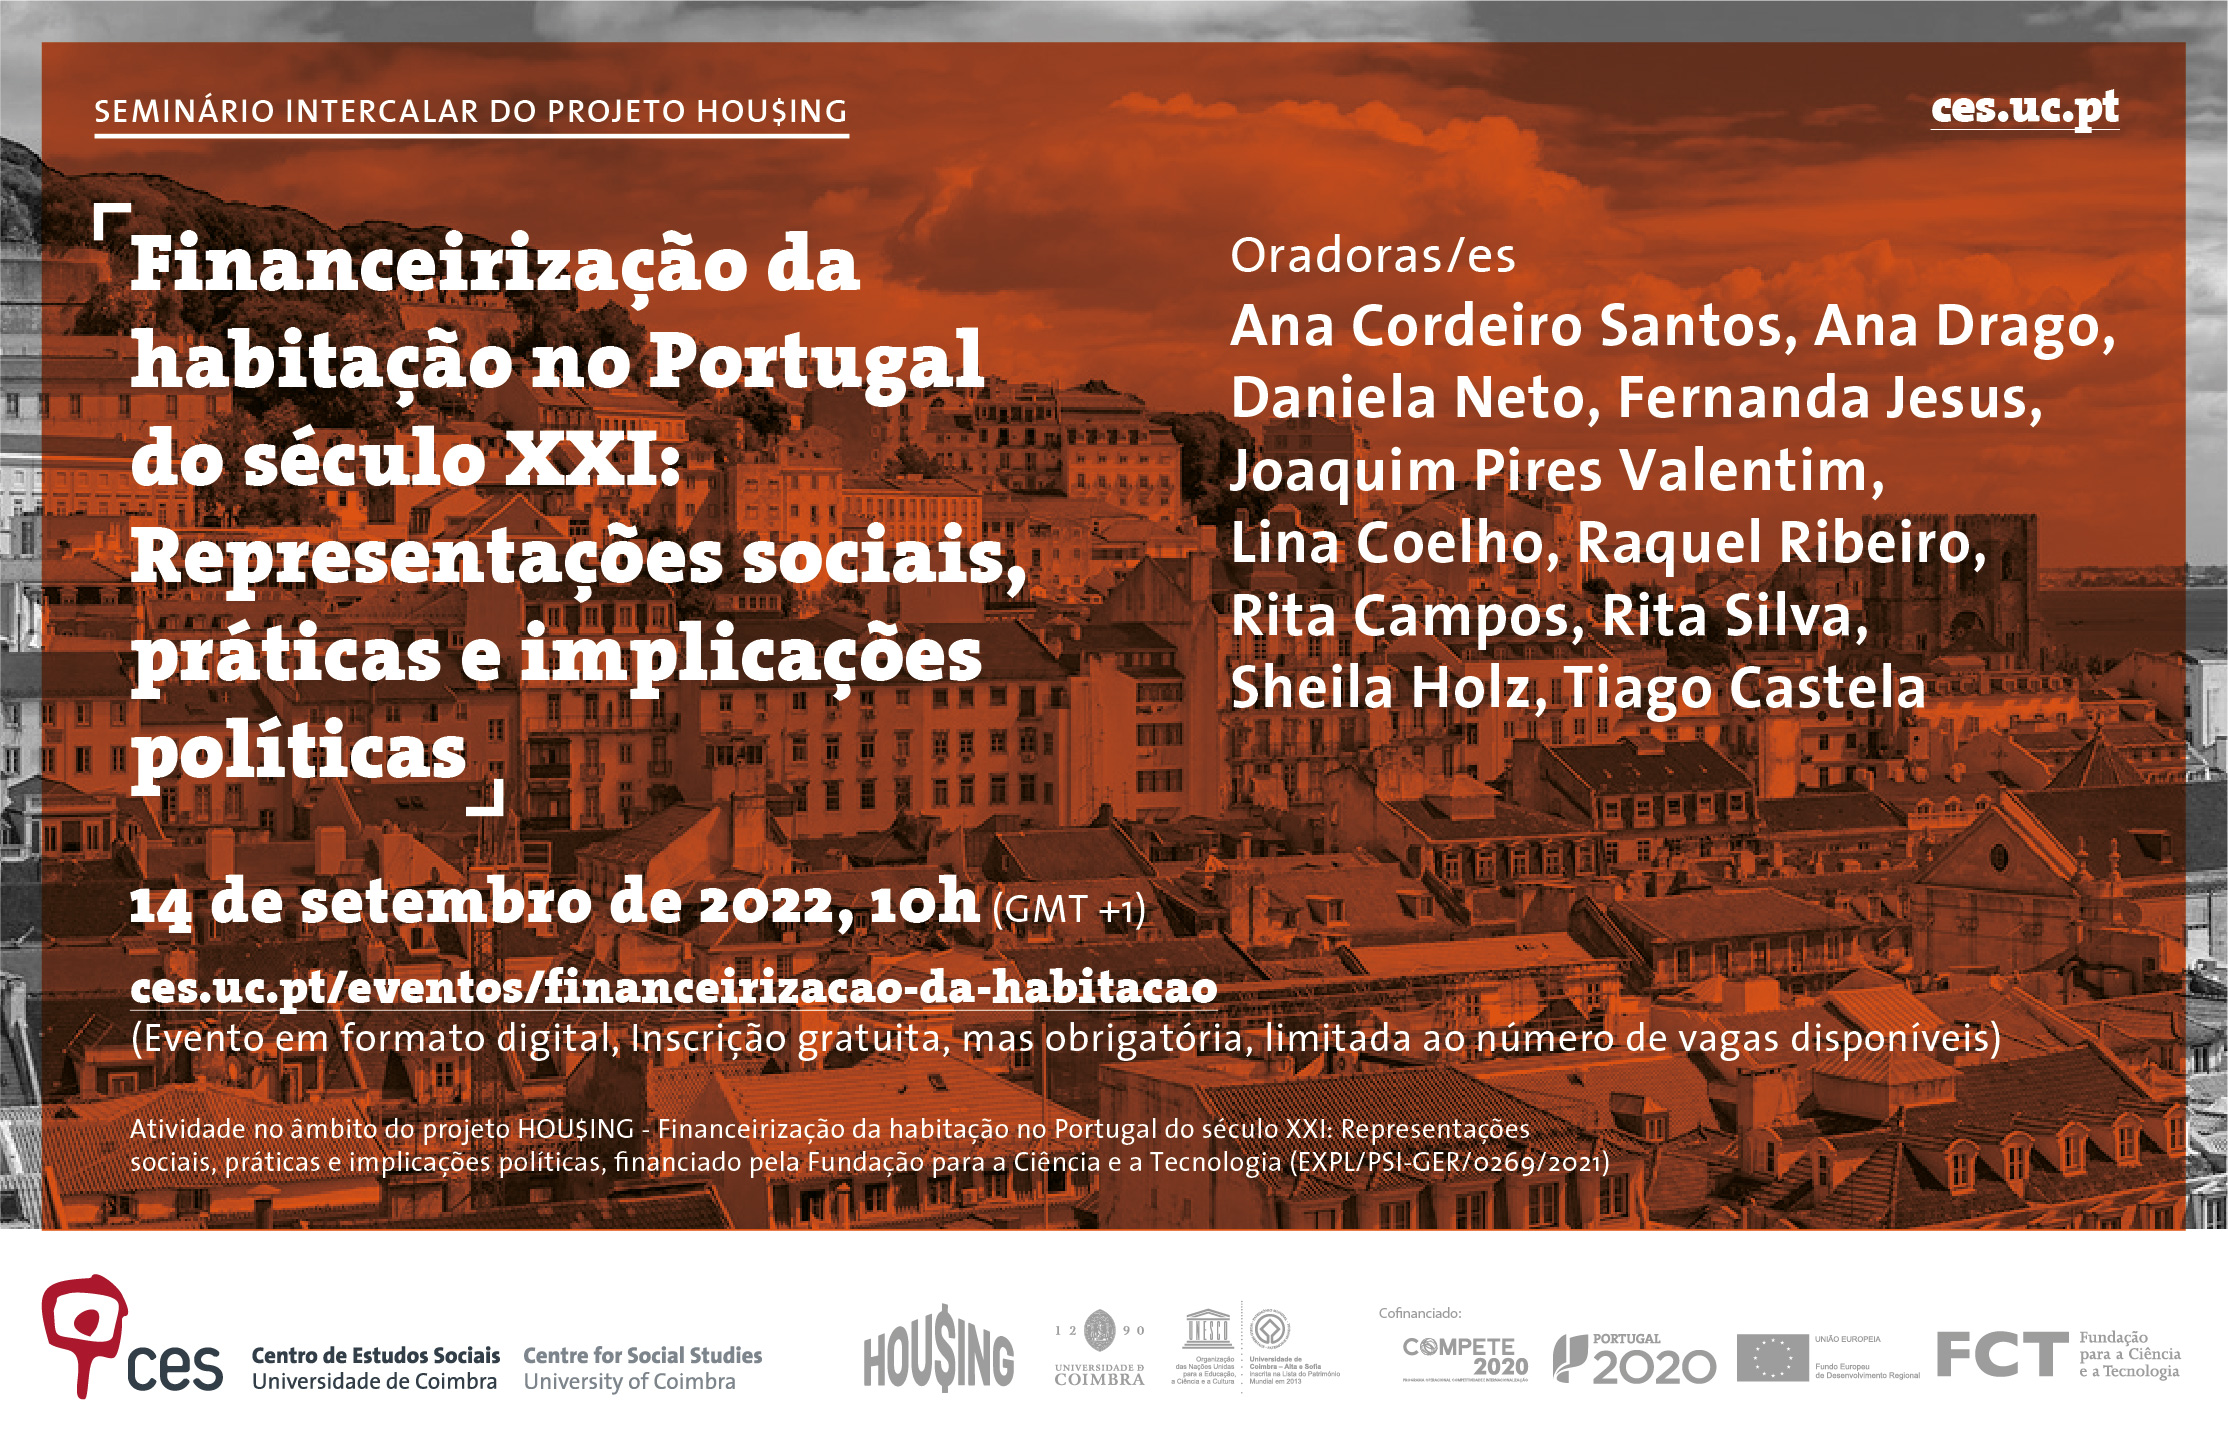 Financialised housing in 21st century Portugal: Social representations, practices, and political stakes<span id="edit_39420"><script>$(function() { $('#edit_39420').load( "/myces/user/editobj.php?tipo=evento&id=39420" ); });</script></span>